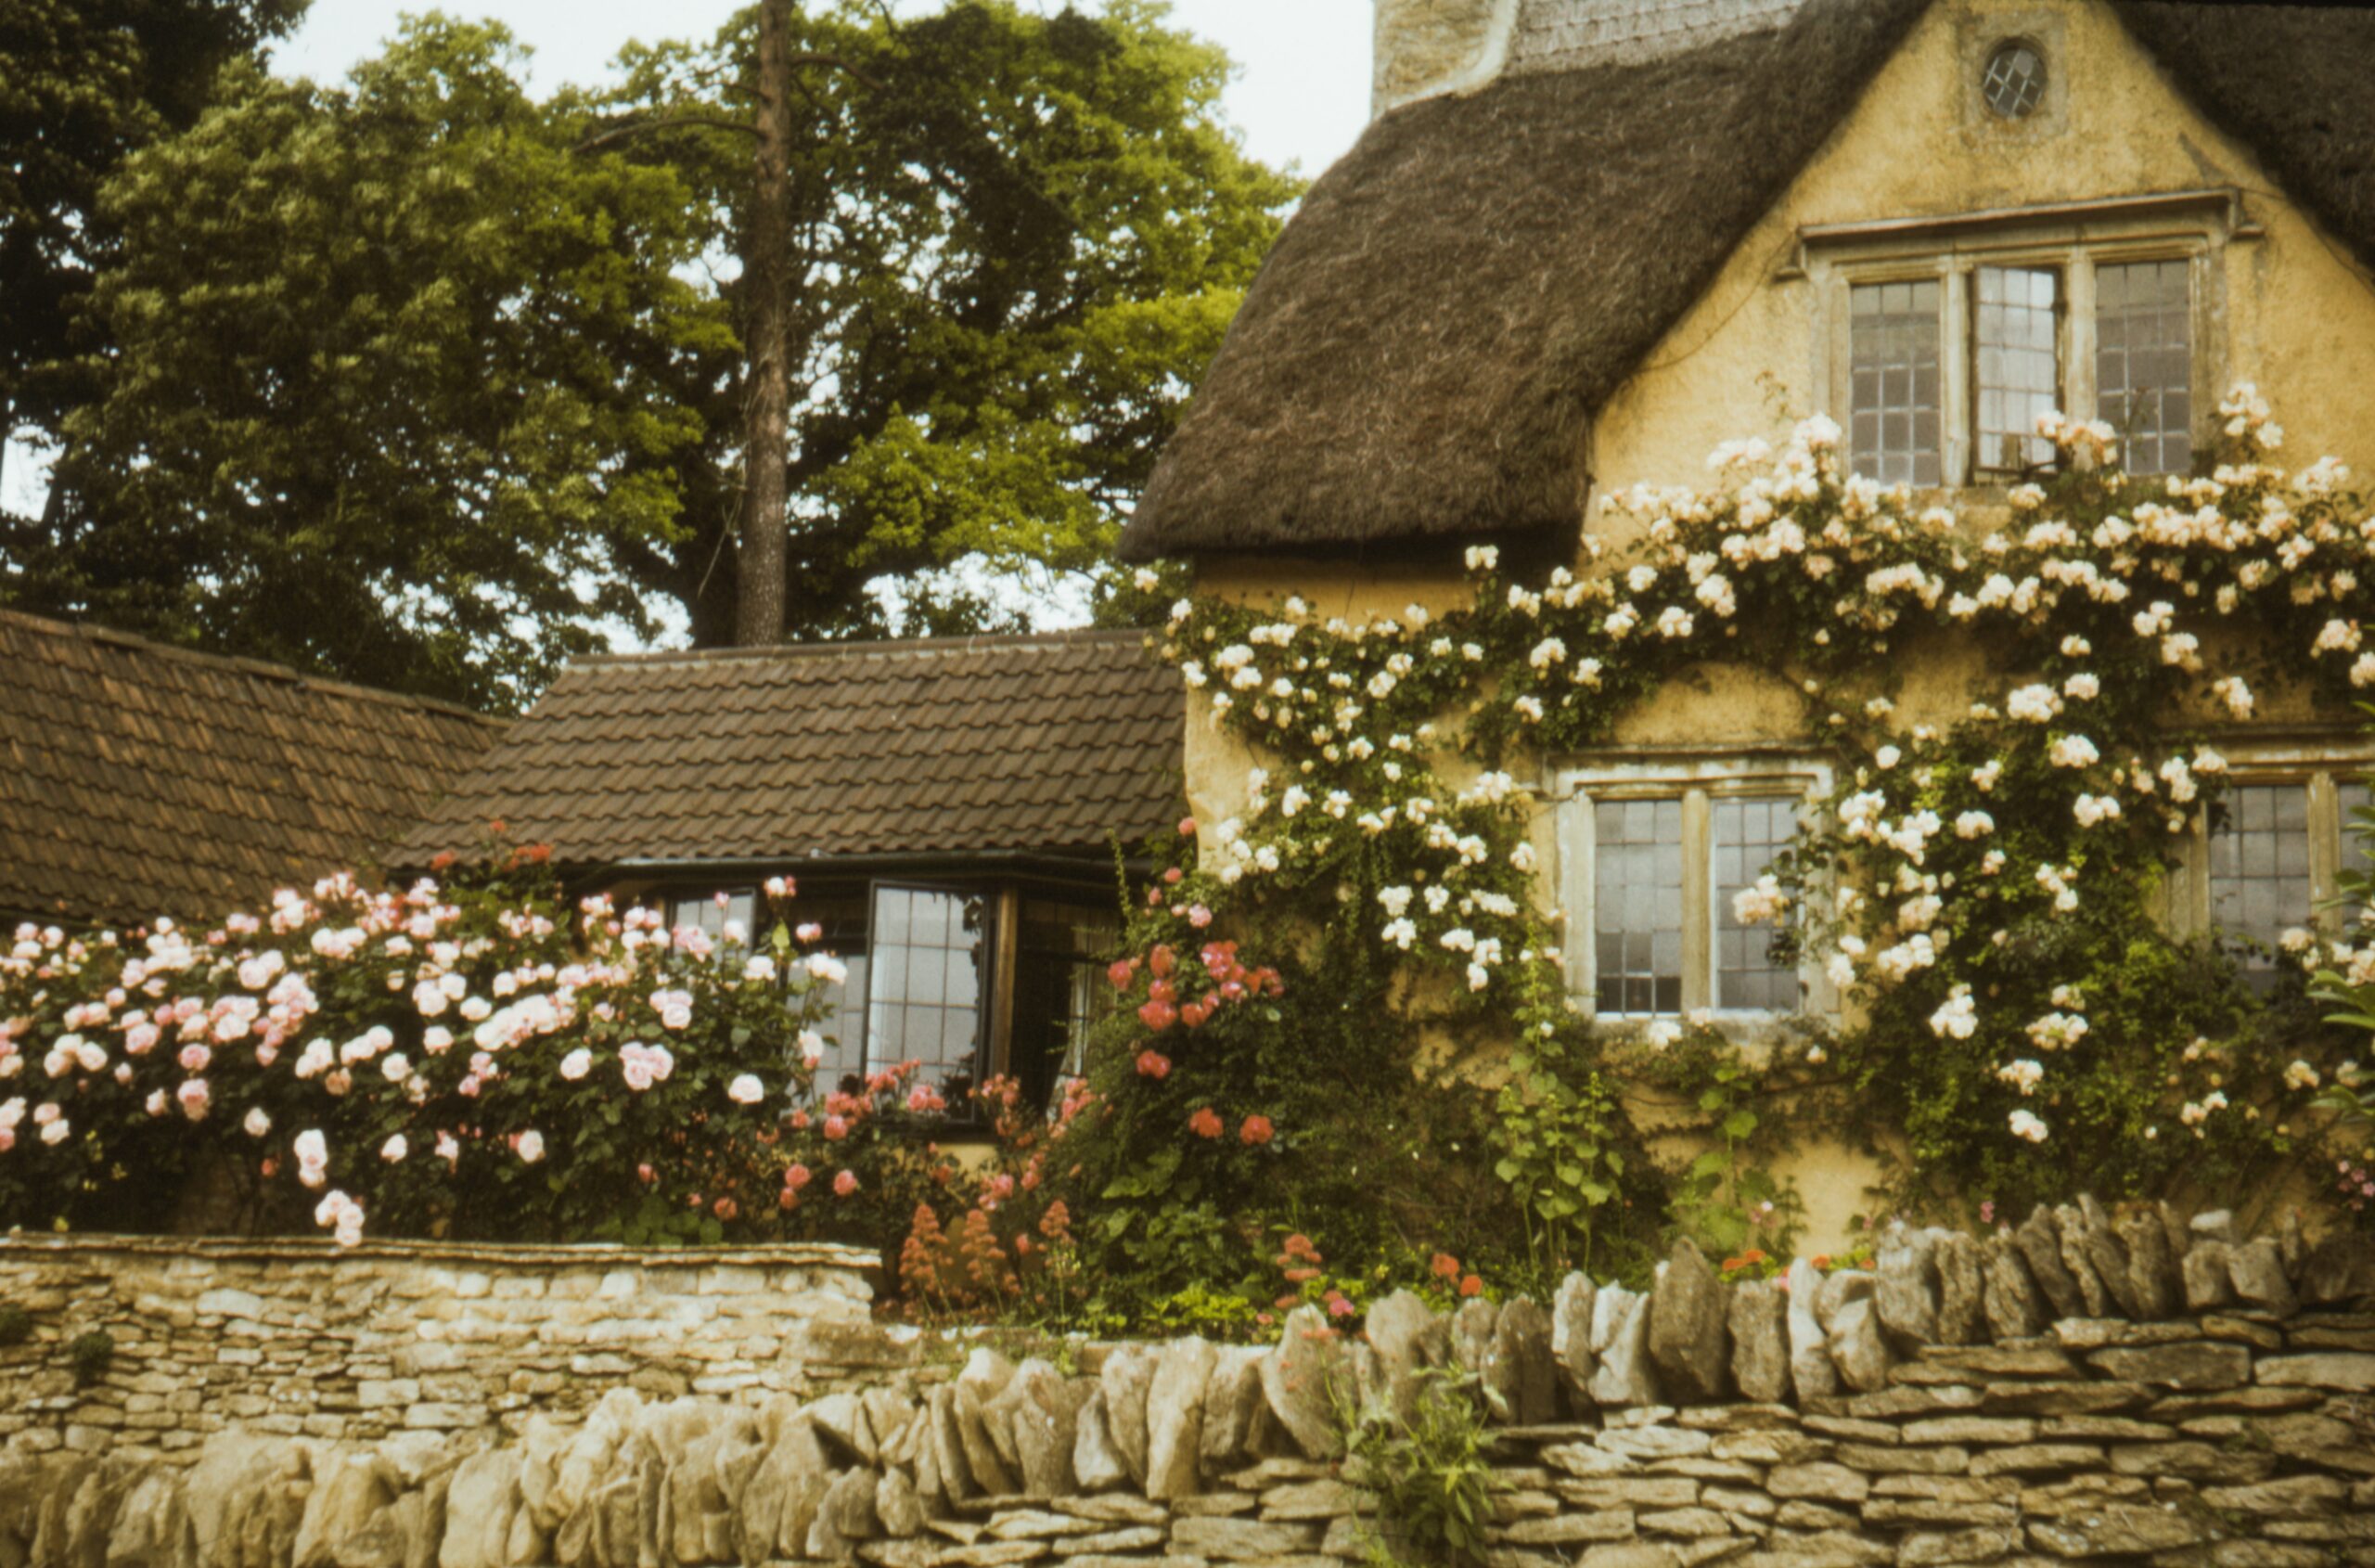 Preparing Your Holiday Home For The Season Ahead